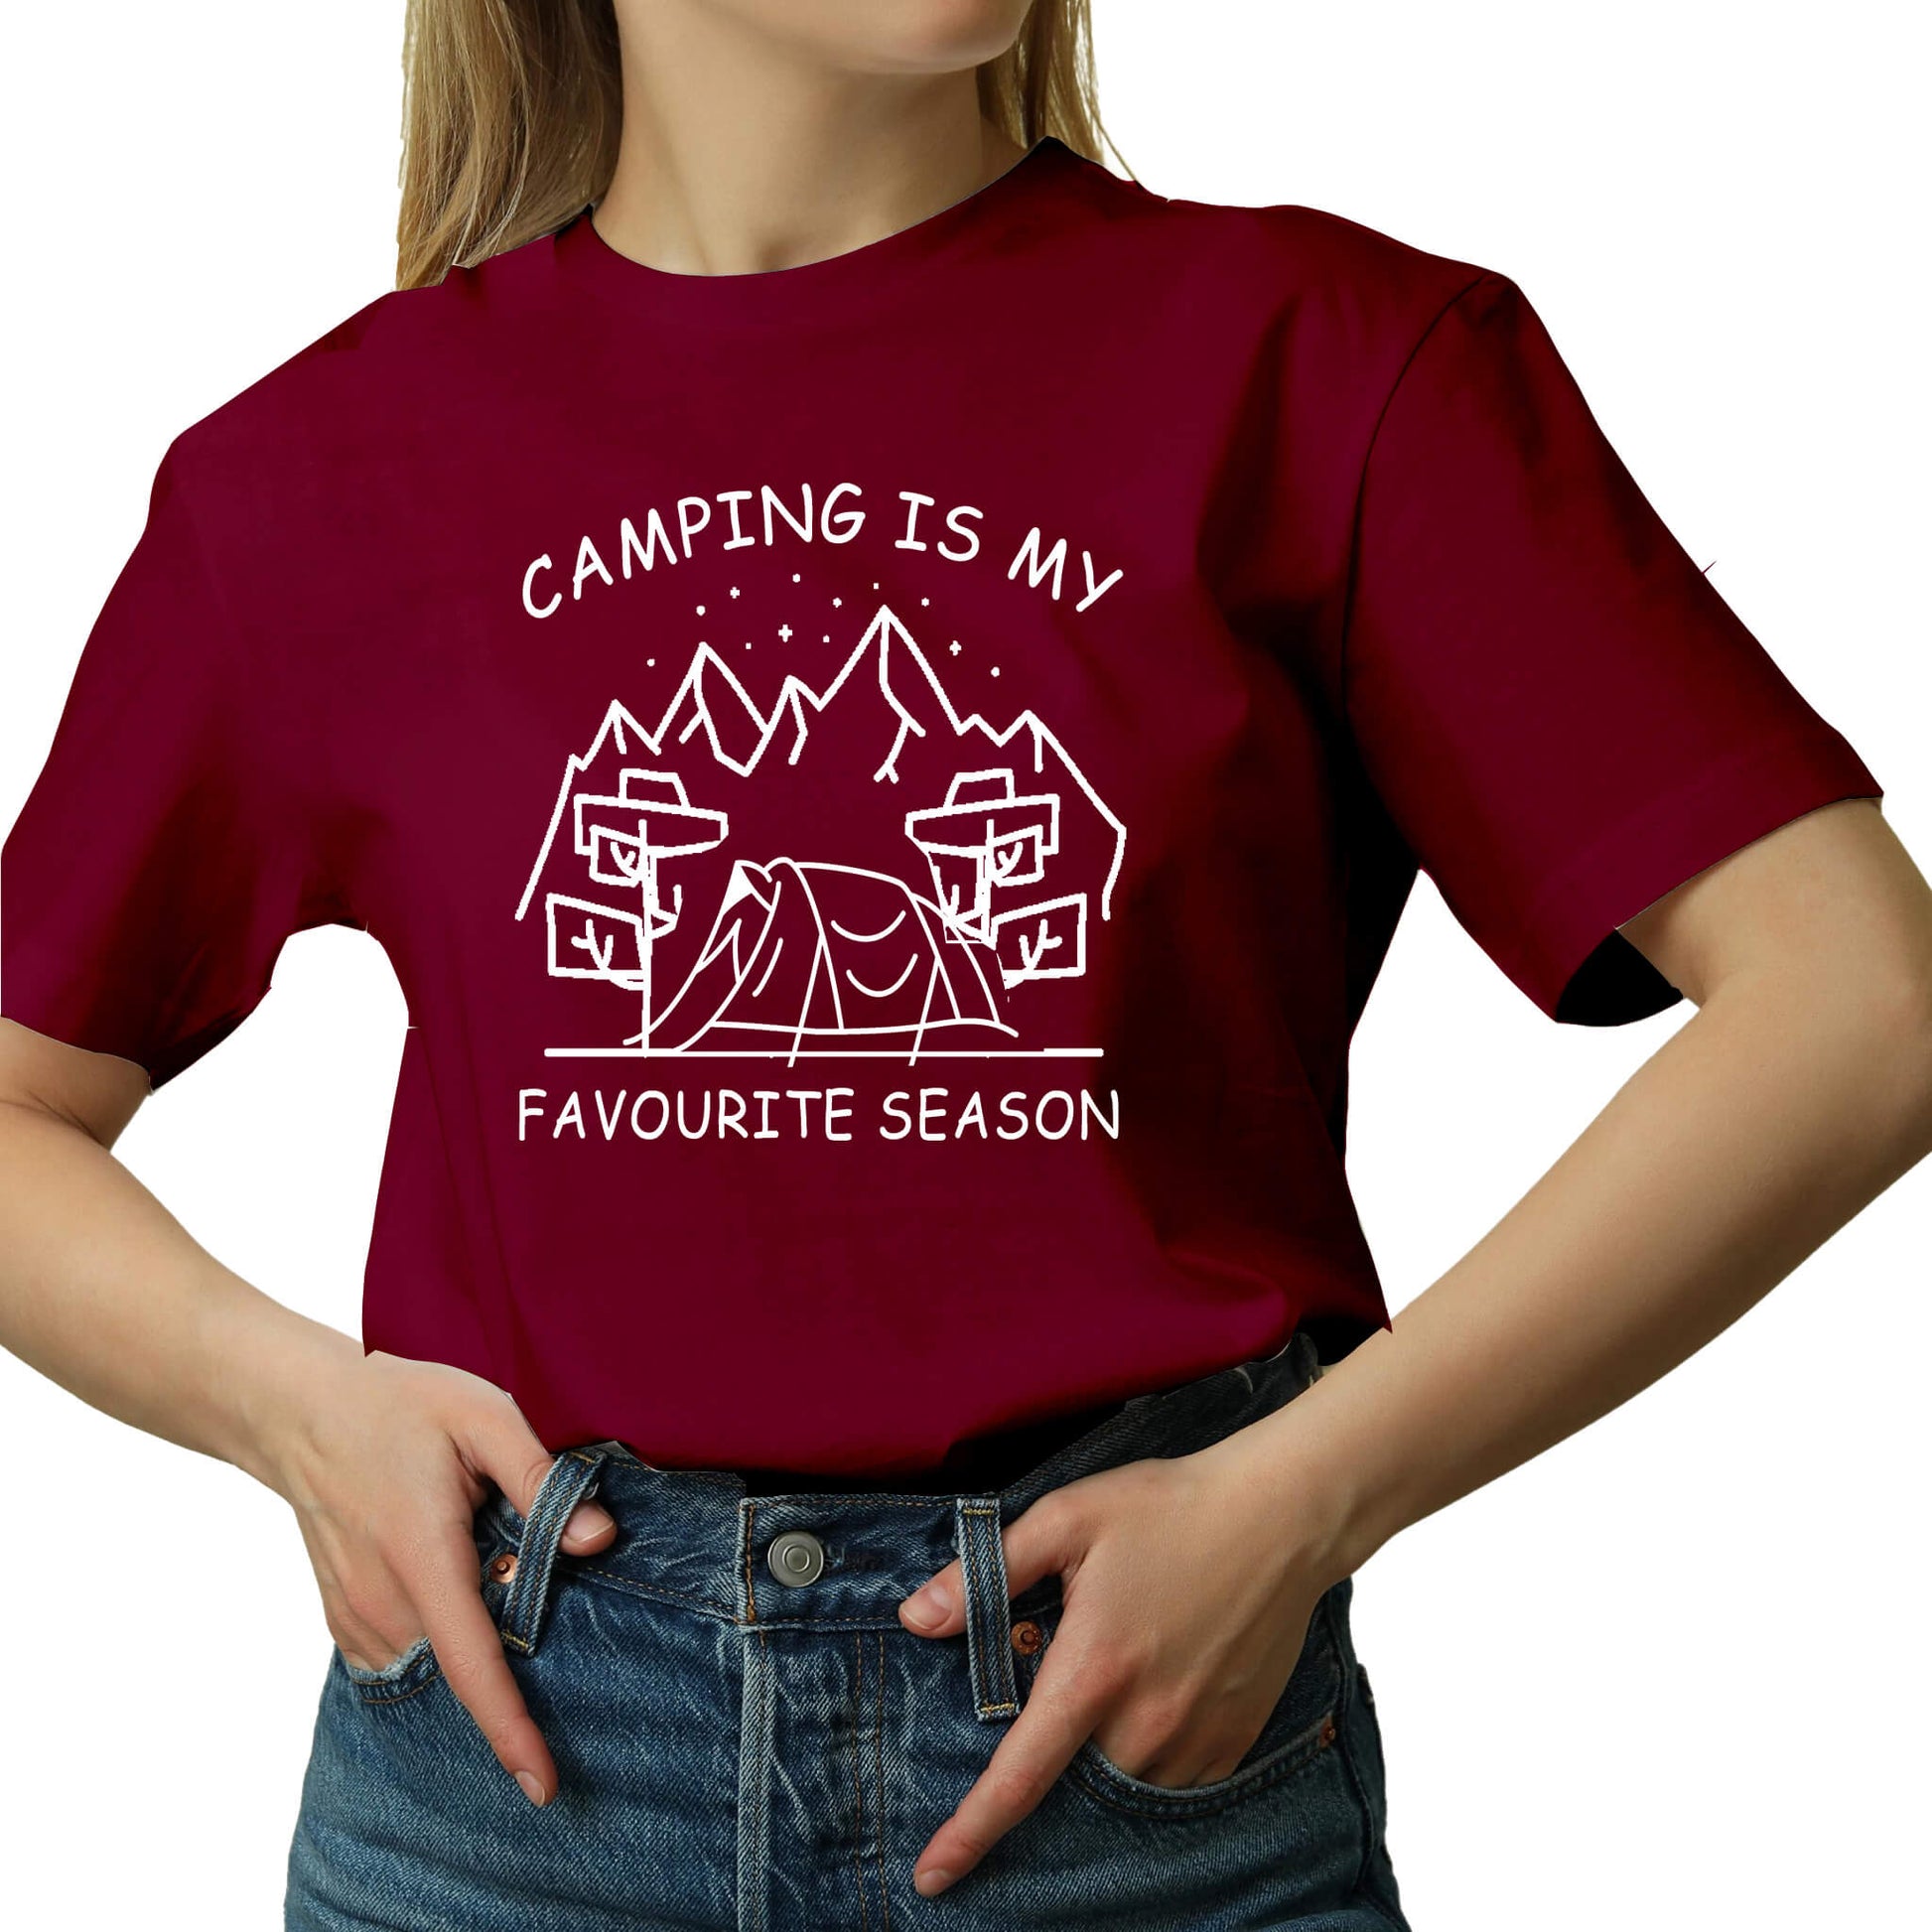  "red Graphic tee with an illustration of a tent, surrounded by nature. Text reads: 'Camping is my favorite season.' Celebrate the great outdoors!"